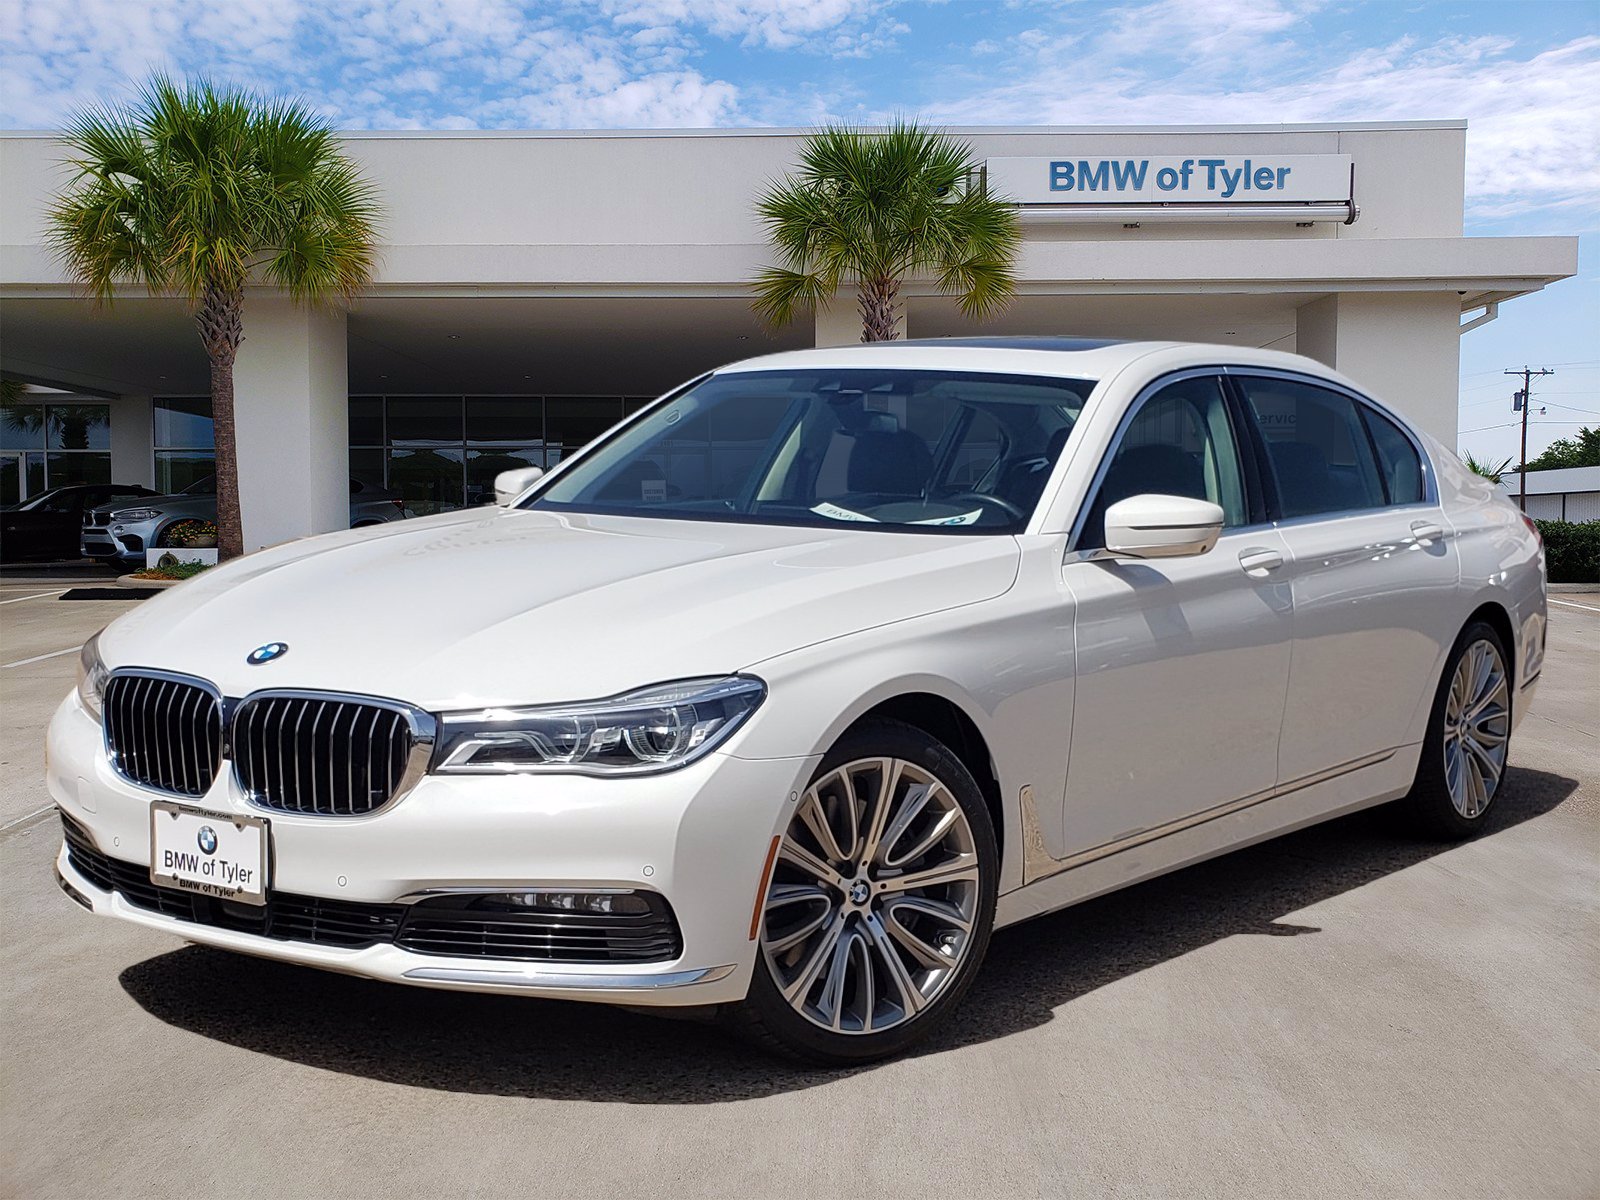 Certified PreOwned 2018 BMW 7 Series 750i 4dr Car in